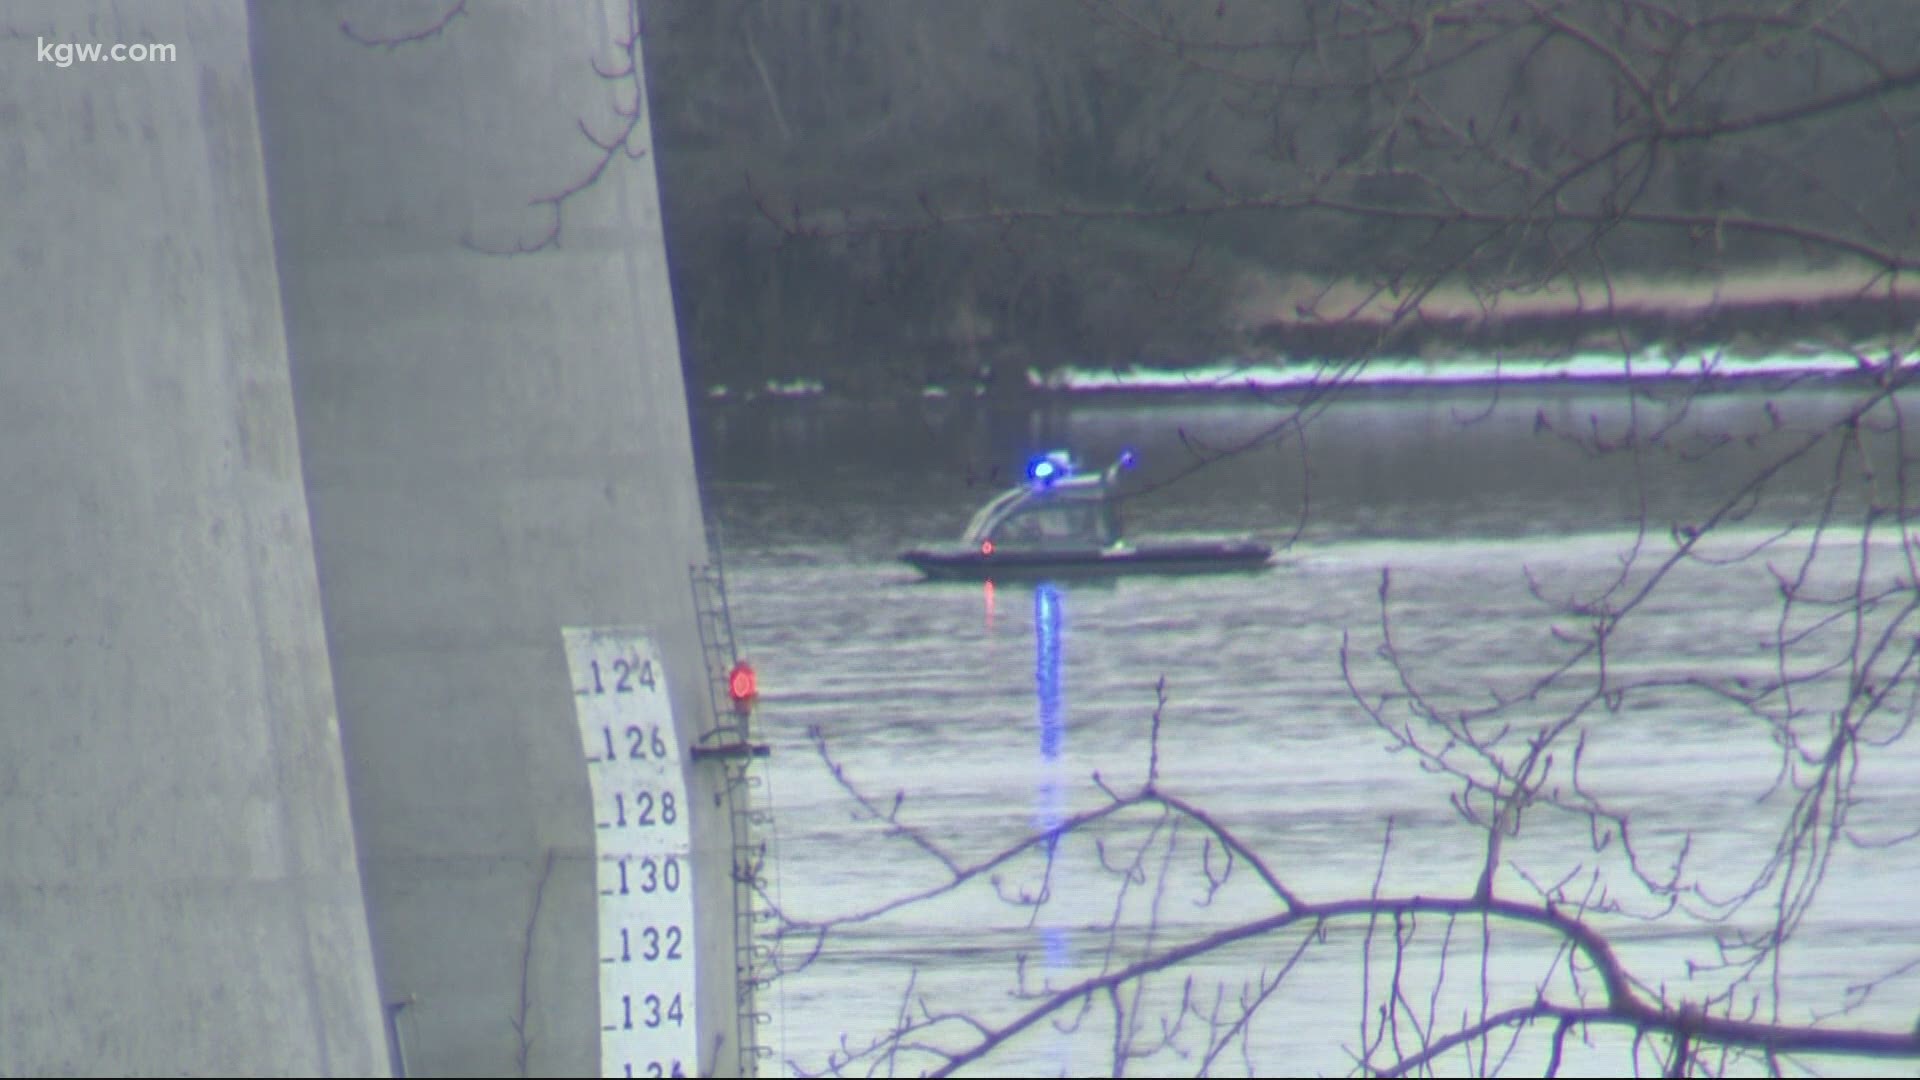 On Wednesday, a dive team recovered a body from inside a car in the Columbia River near the Glenn Jackson Bridge.